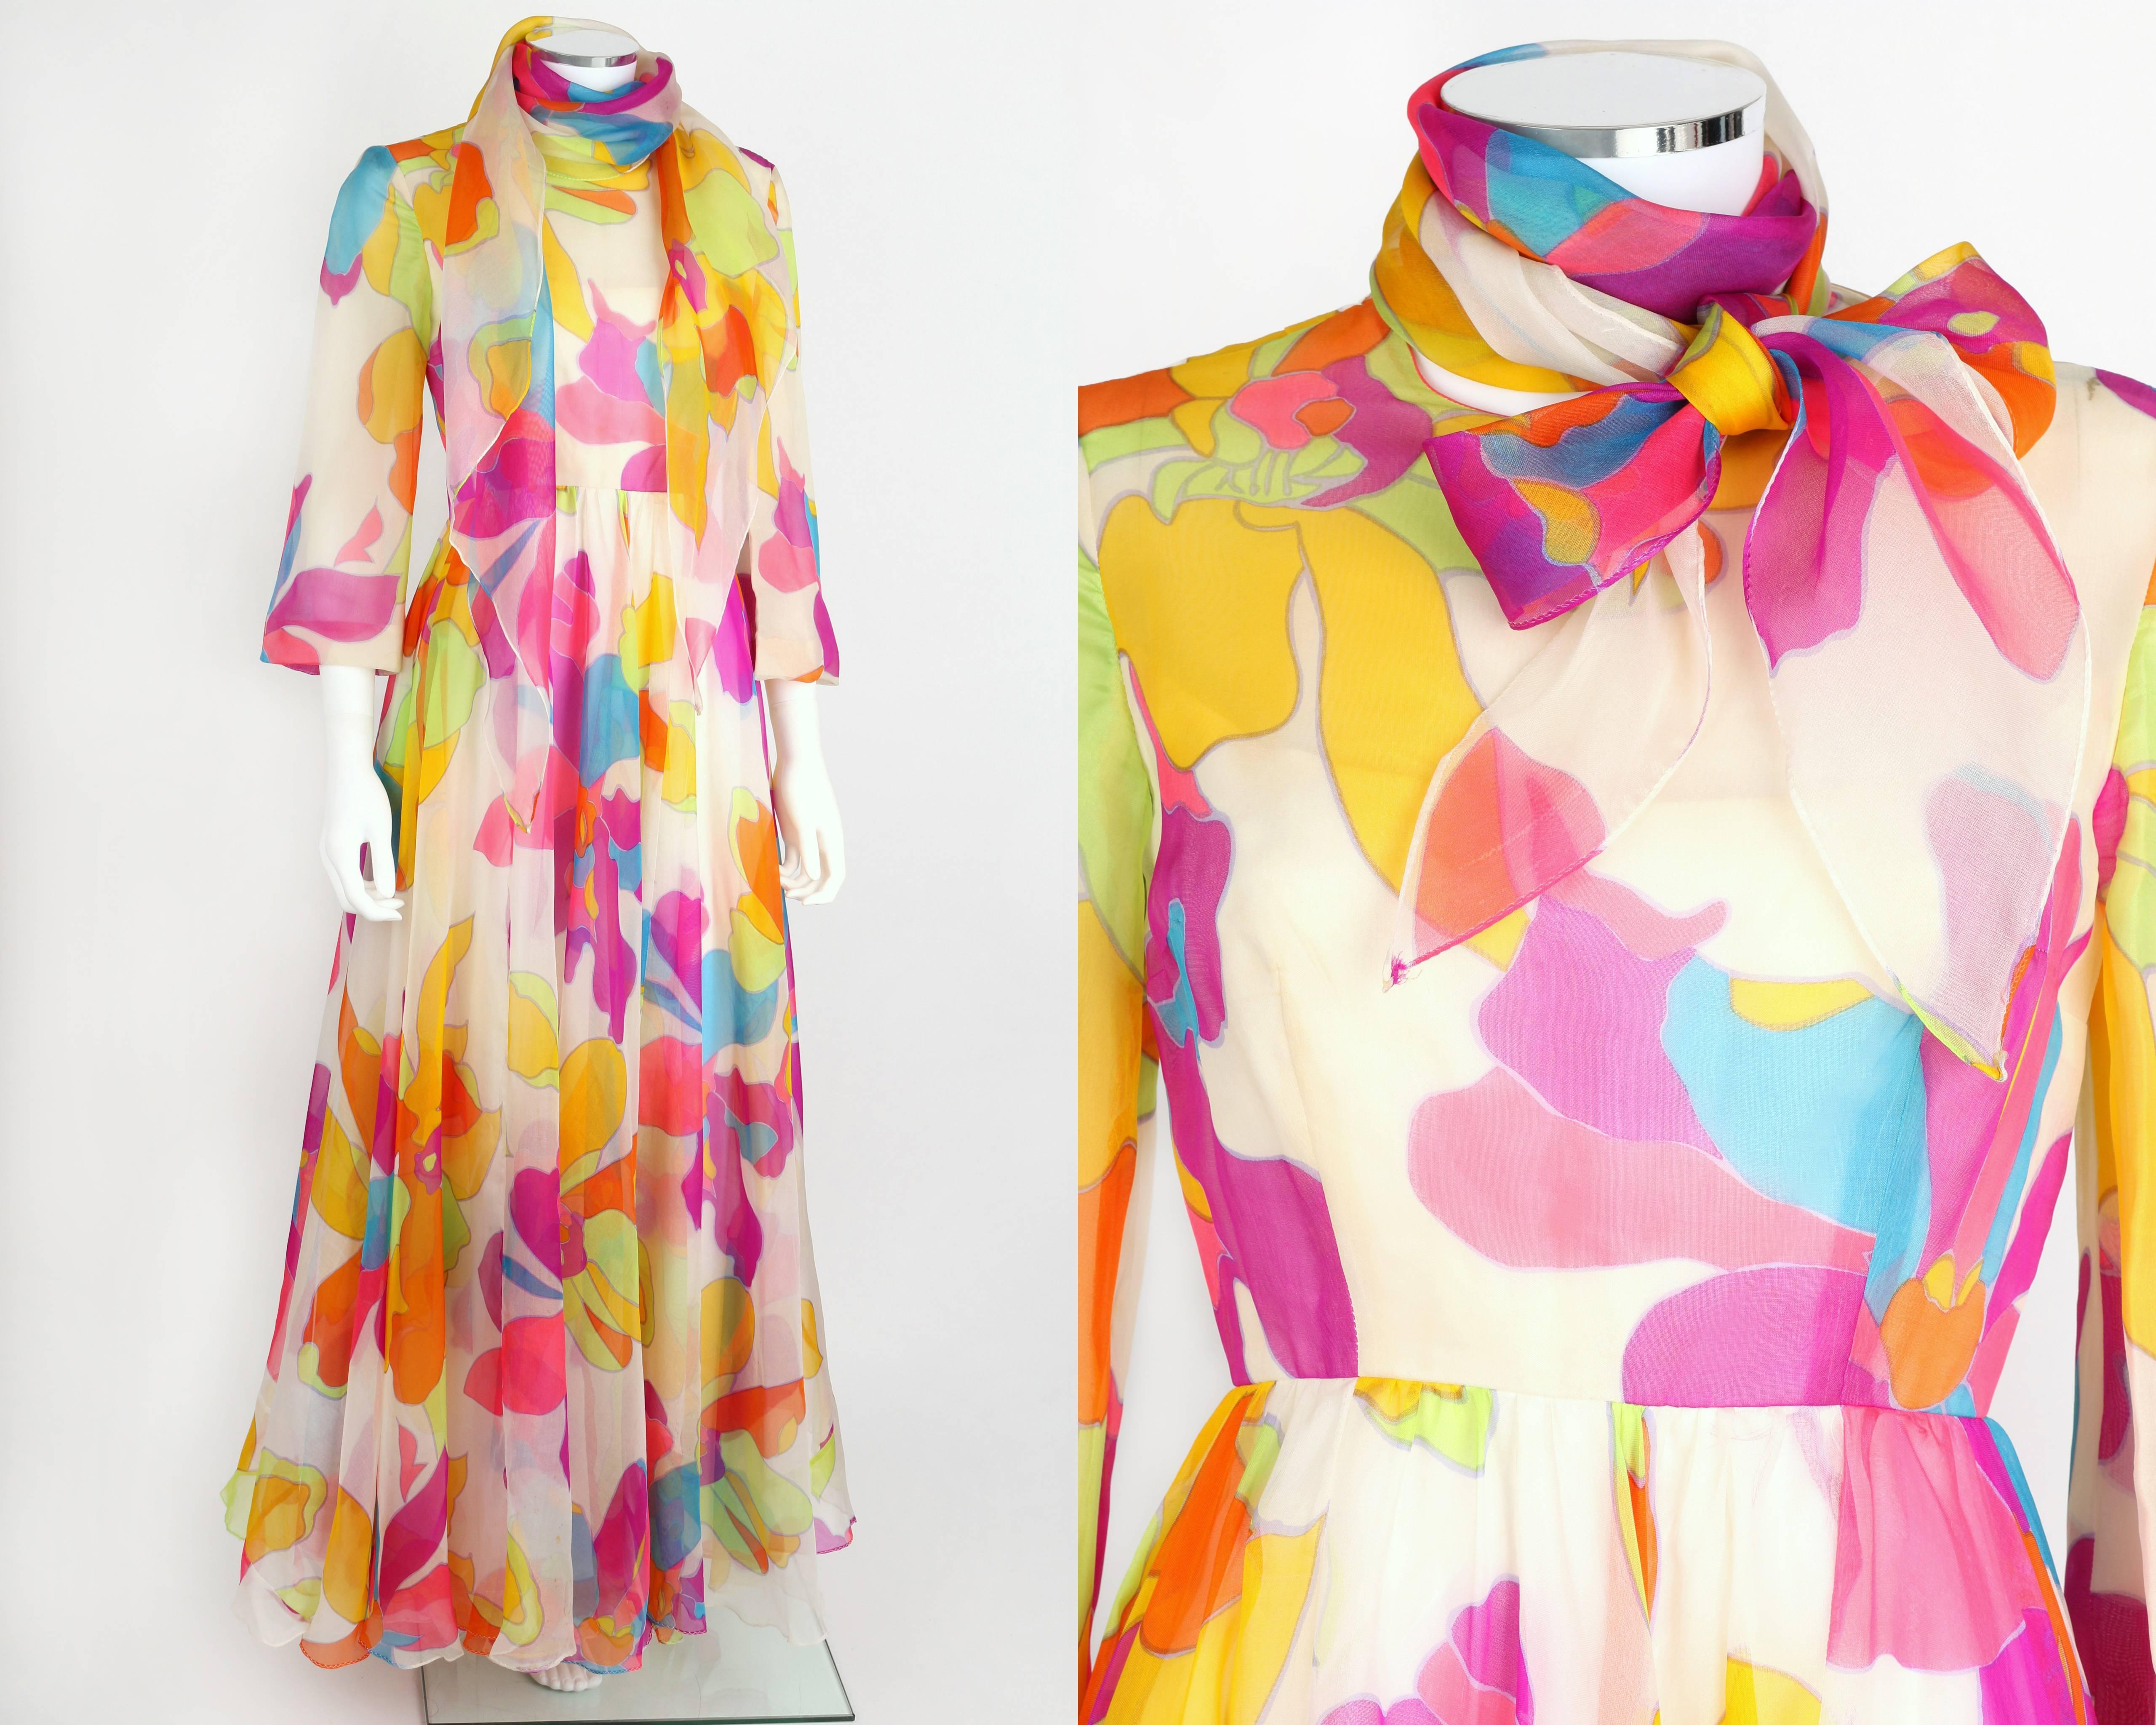 Vintage Kiki Hart c.1970's white chiffon maxi dress with a brightly colored psychedelic floral print in shades of hot pink, orange, lime green, blue, and magenta. 3/4 length sleeves. Crew neckline. Attached scarf with angled tails at back of